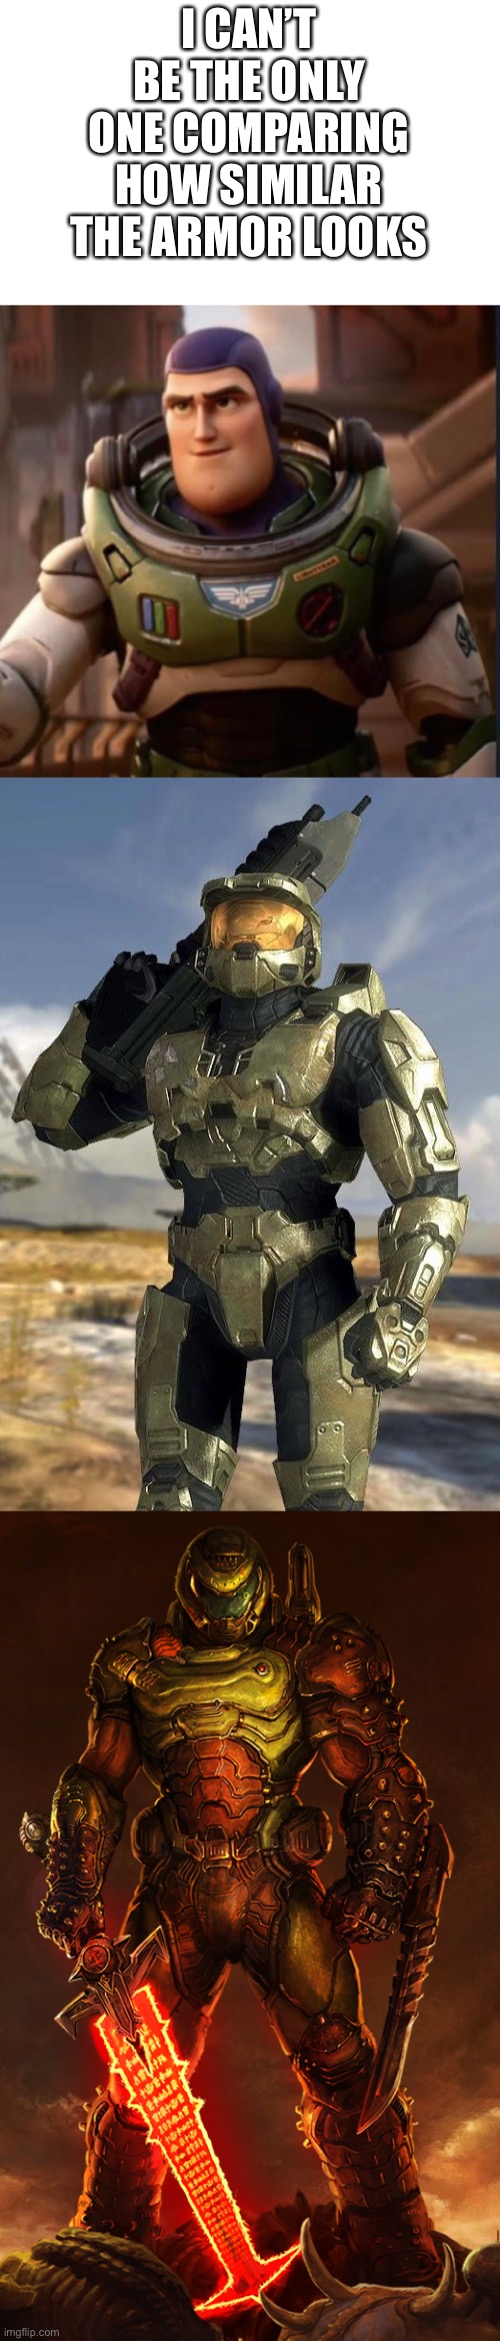 I CAN’T BE THE ONLY ONE COMPARING HOW SIMILAR THE ARMOR LOOKS | image tagged in master chief,doomguy | made w/ Imgflip meme maker